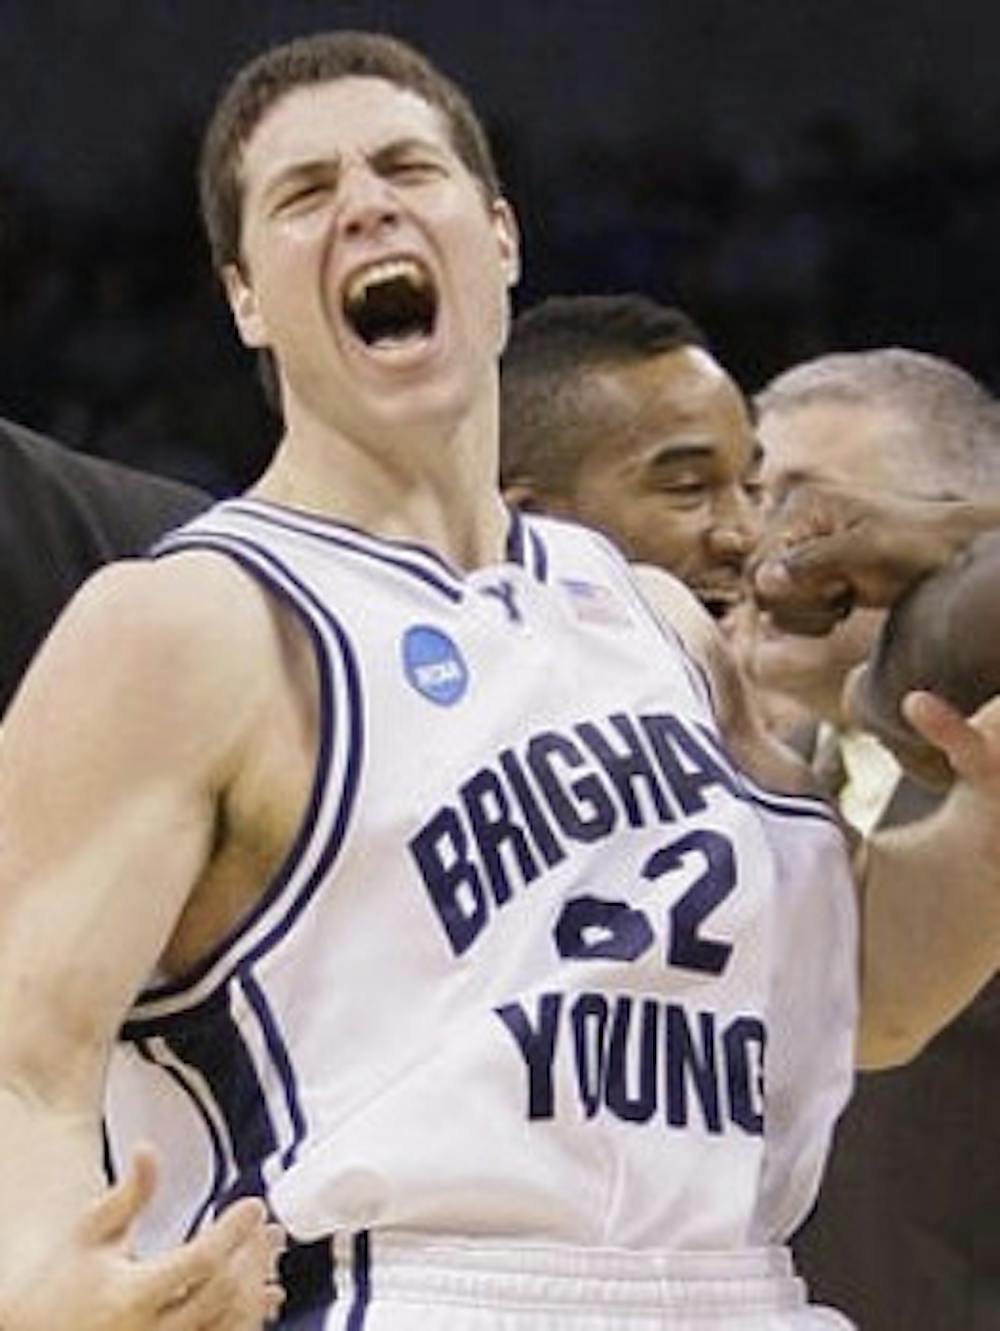 (photo courtesy of culturemap.com) BYU's Jimmer Fredrette leads the nation in scoring, but can he lead his team to a national championship?